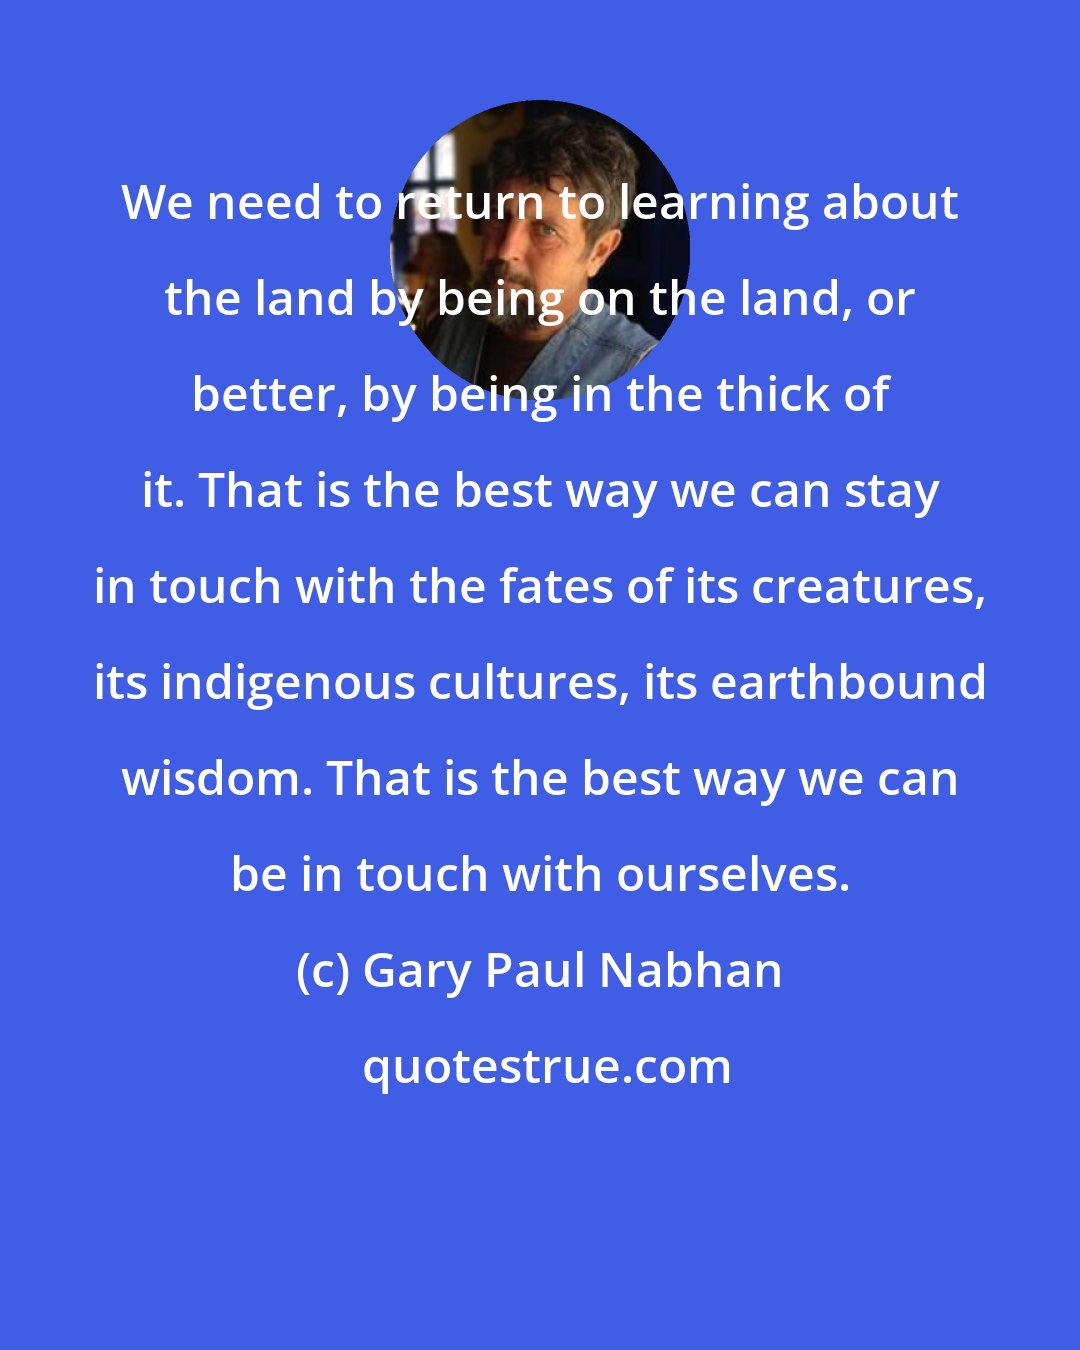 Gary Paul Nabhan: We need to return to learning about the land by being on the land, or better, by being in the thick of it. That is the best way we can stay in touch with the fates of its creatures, its indigenous cultures, its earthbound wisdom. That is the best way we can be in touch with ourselves.